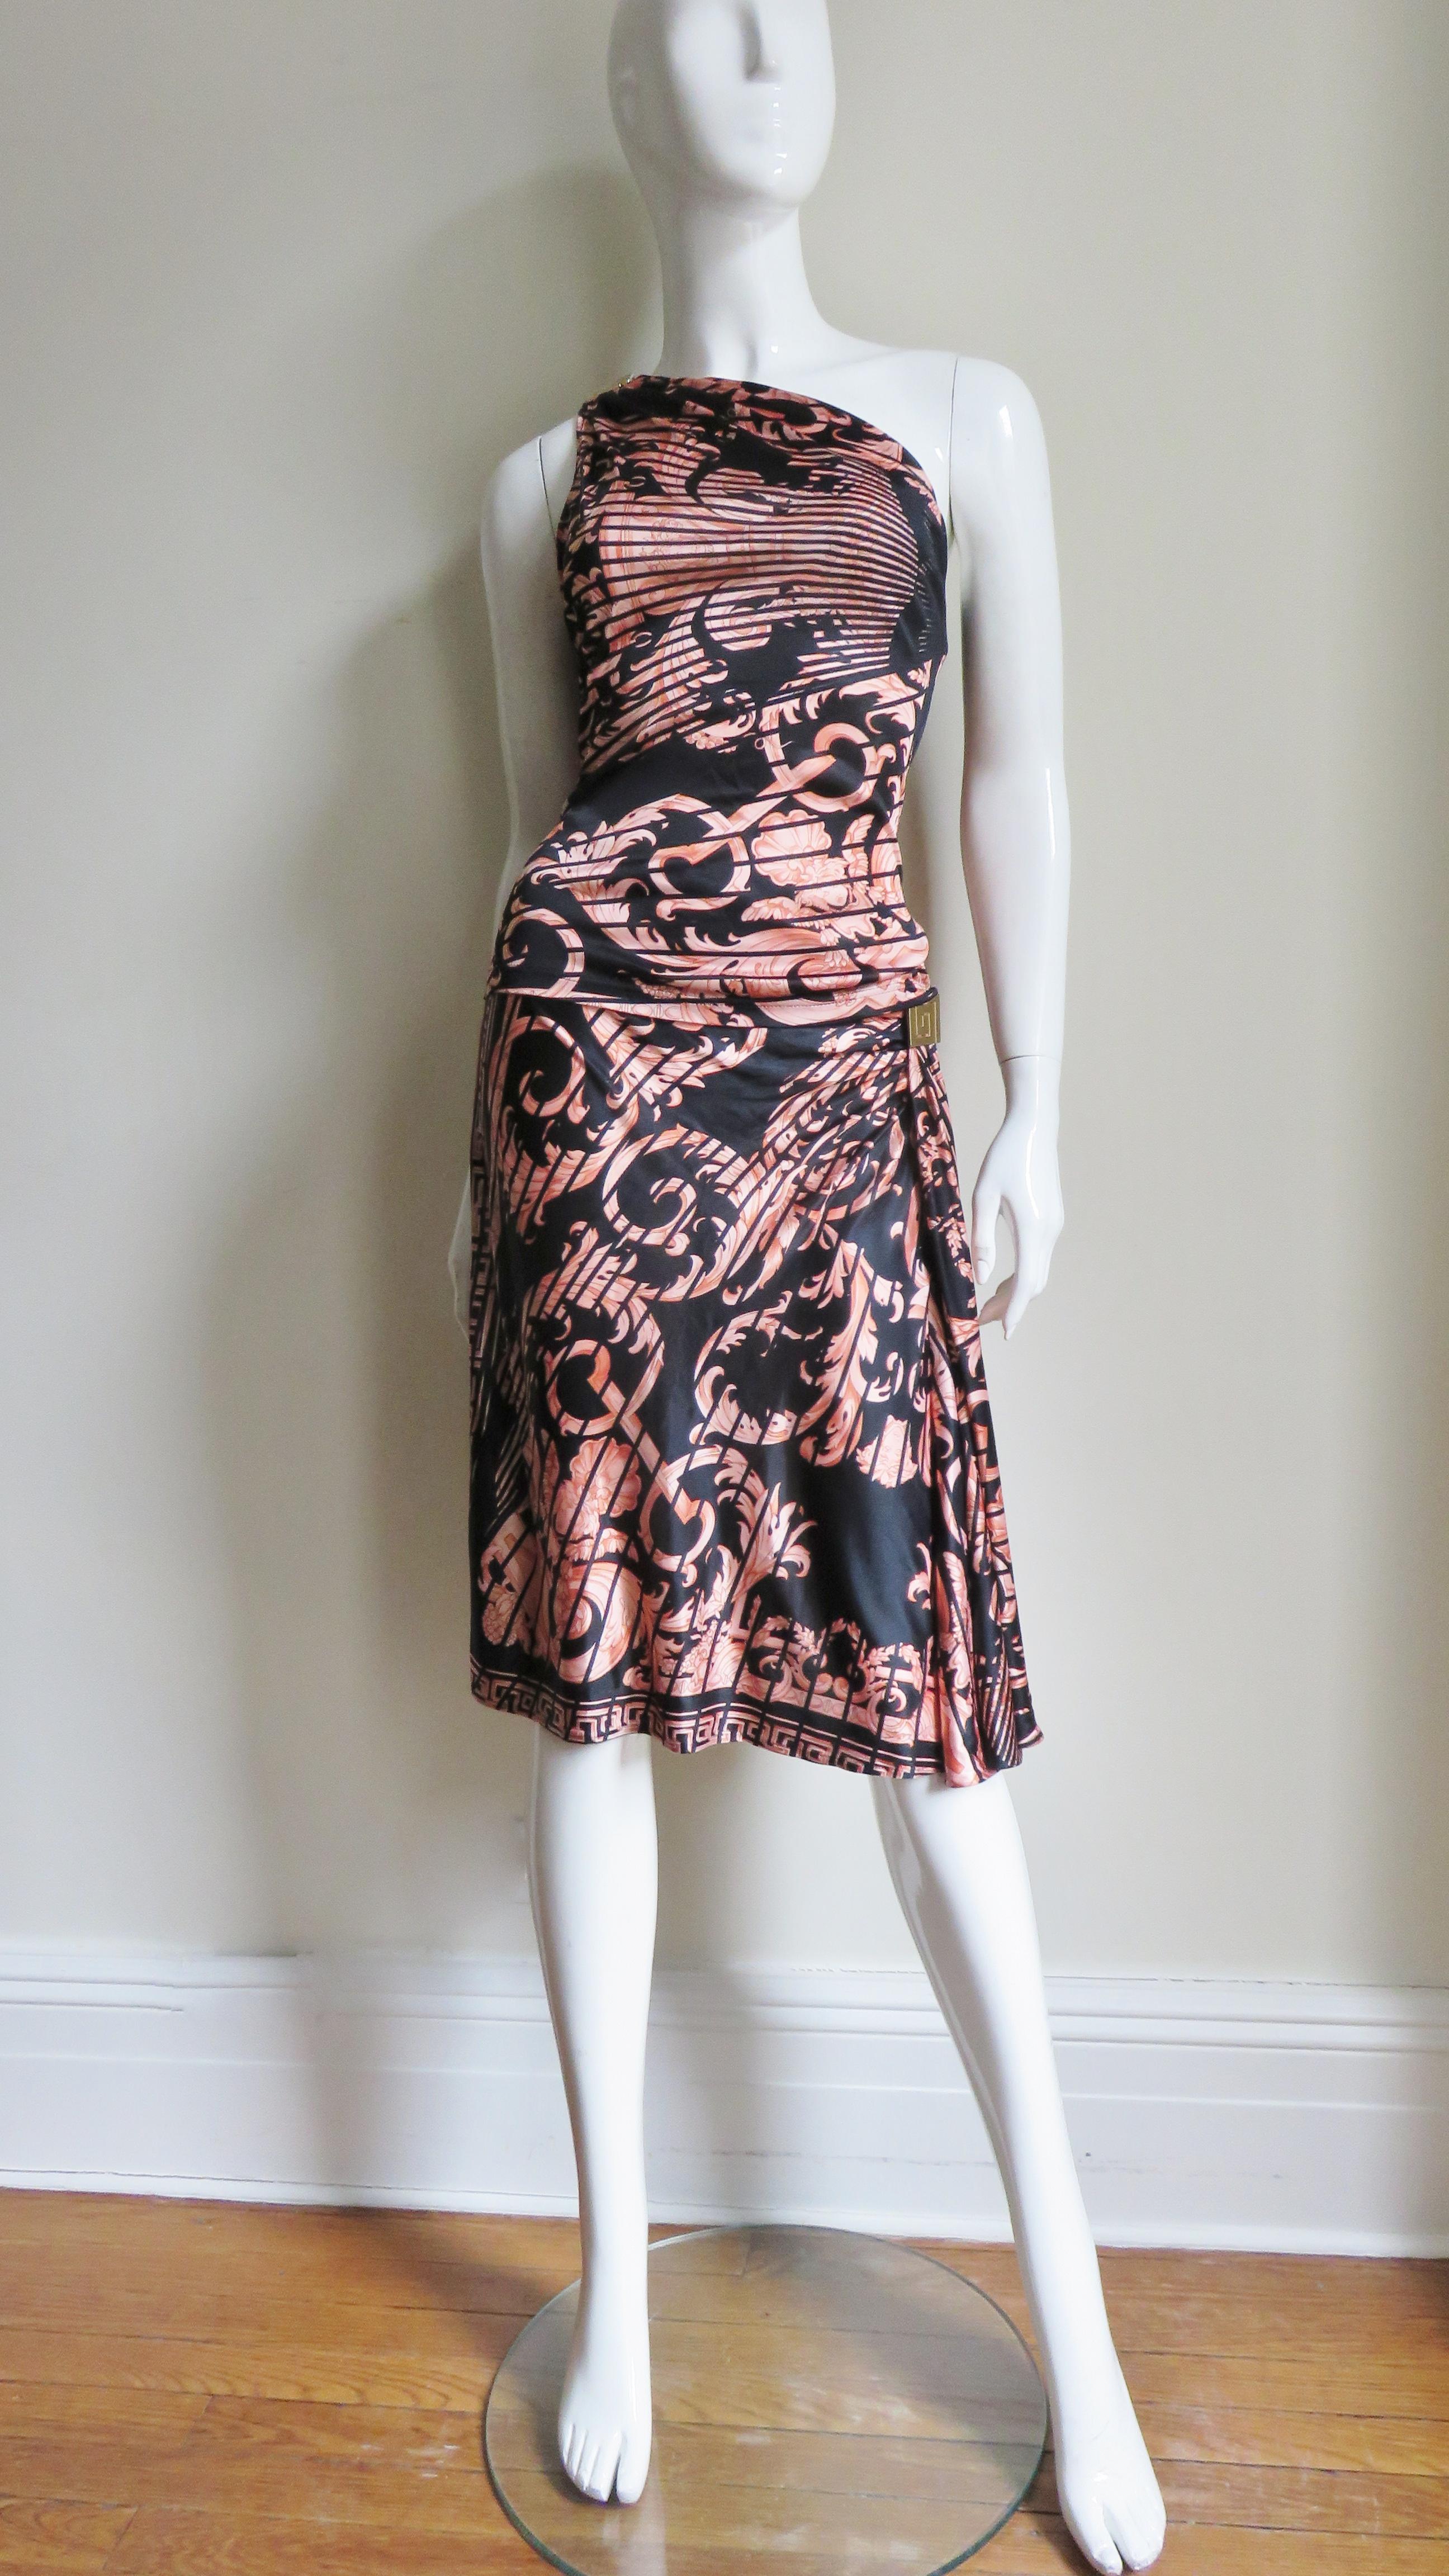 Gianni Versace Silk Skirt and Top Set with Hardware In Good Condition For Sale In Water Mill, NY